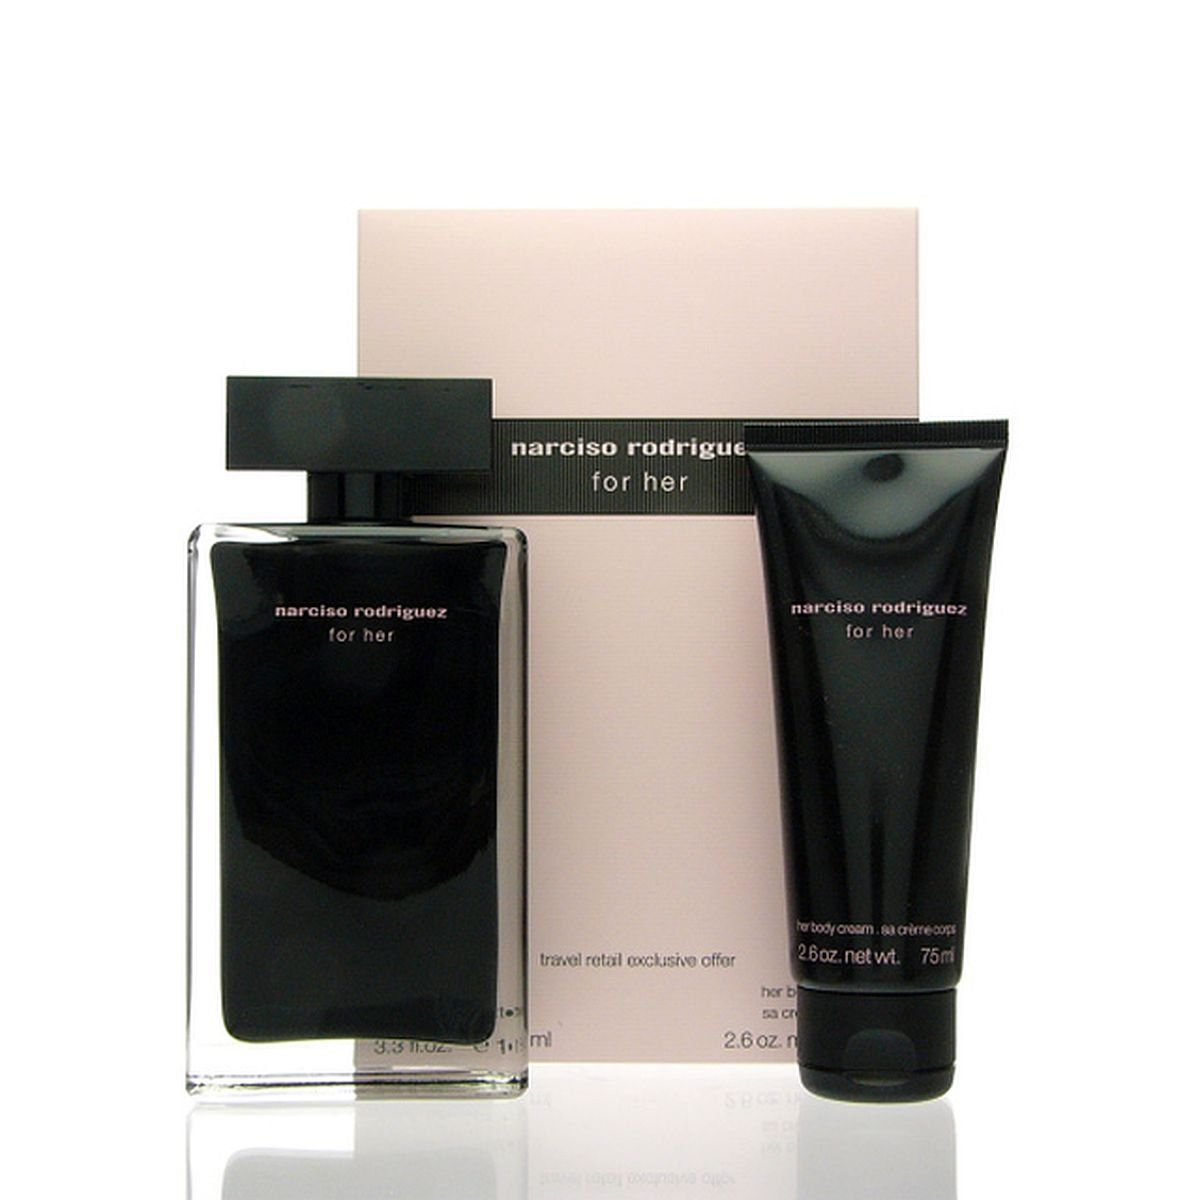 For ml rodriguez BC Narciso - Her Duft-Set + 100 EDT SET narciso Rodriguez